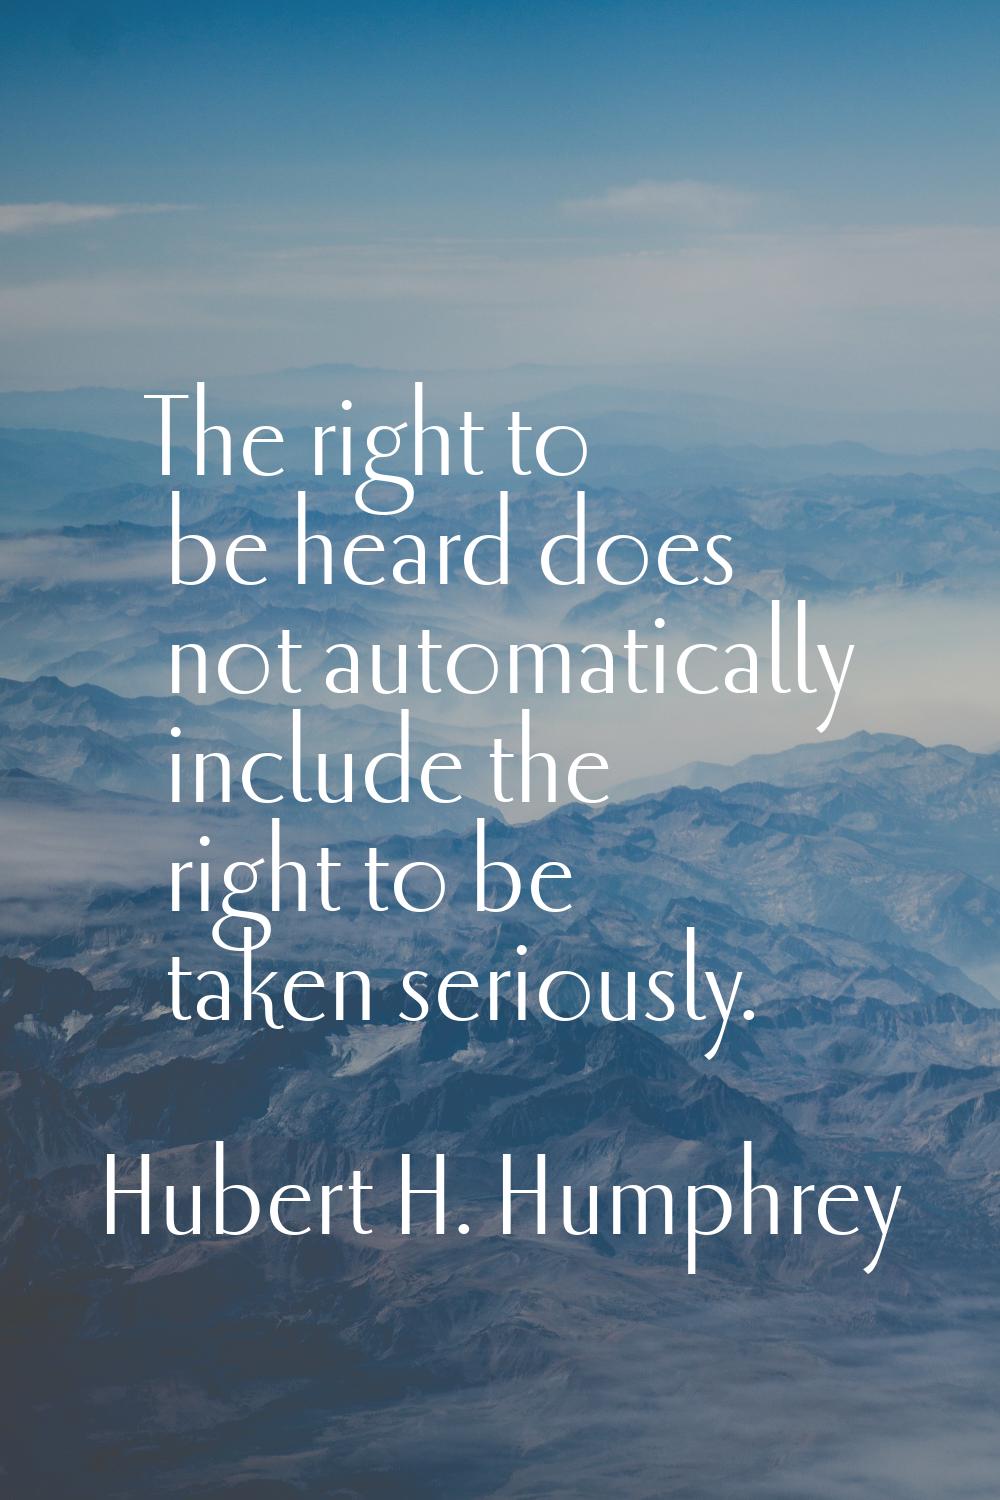 The right to be heard does not automatically include the right to be taken seriously.